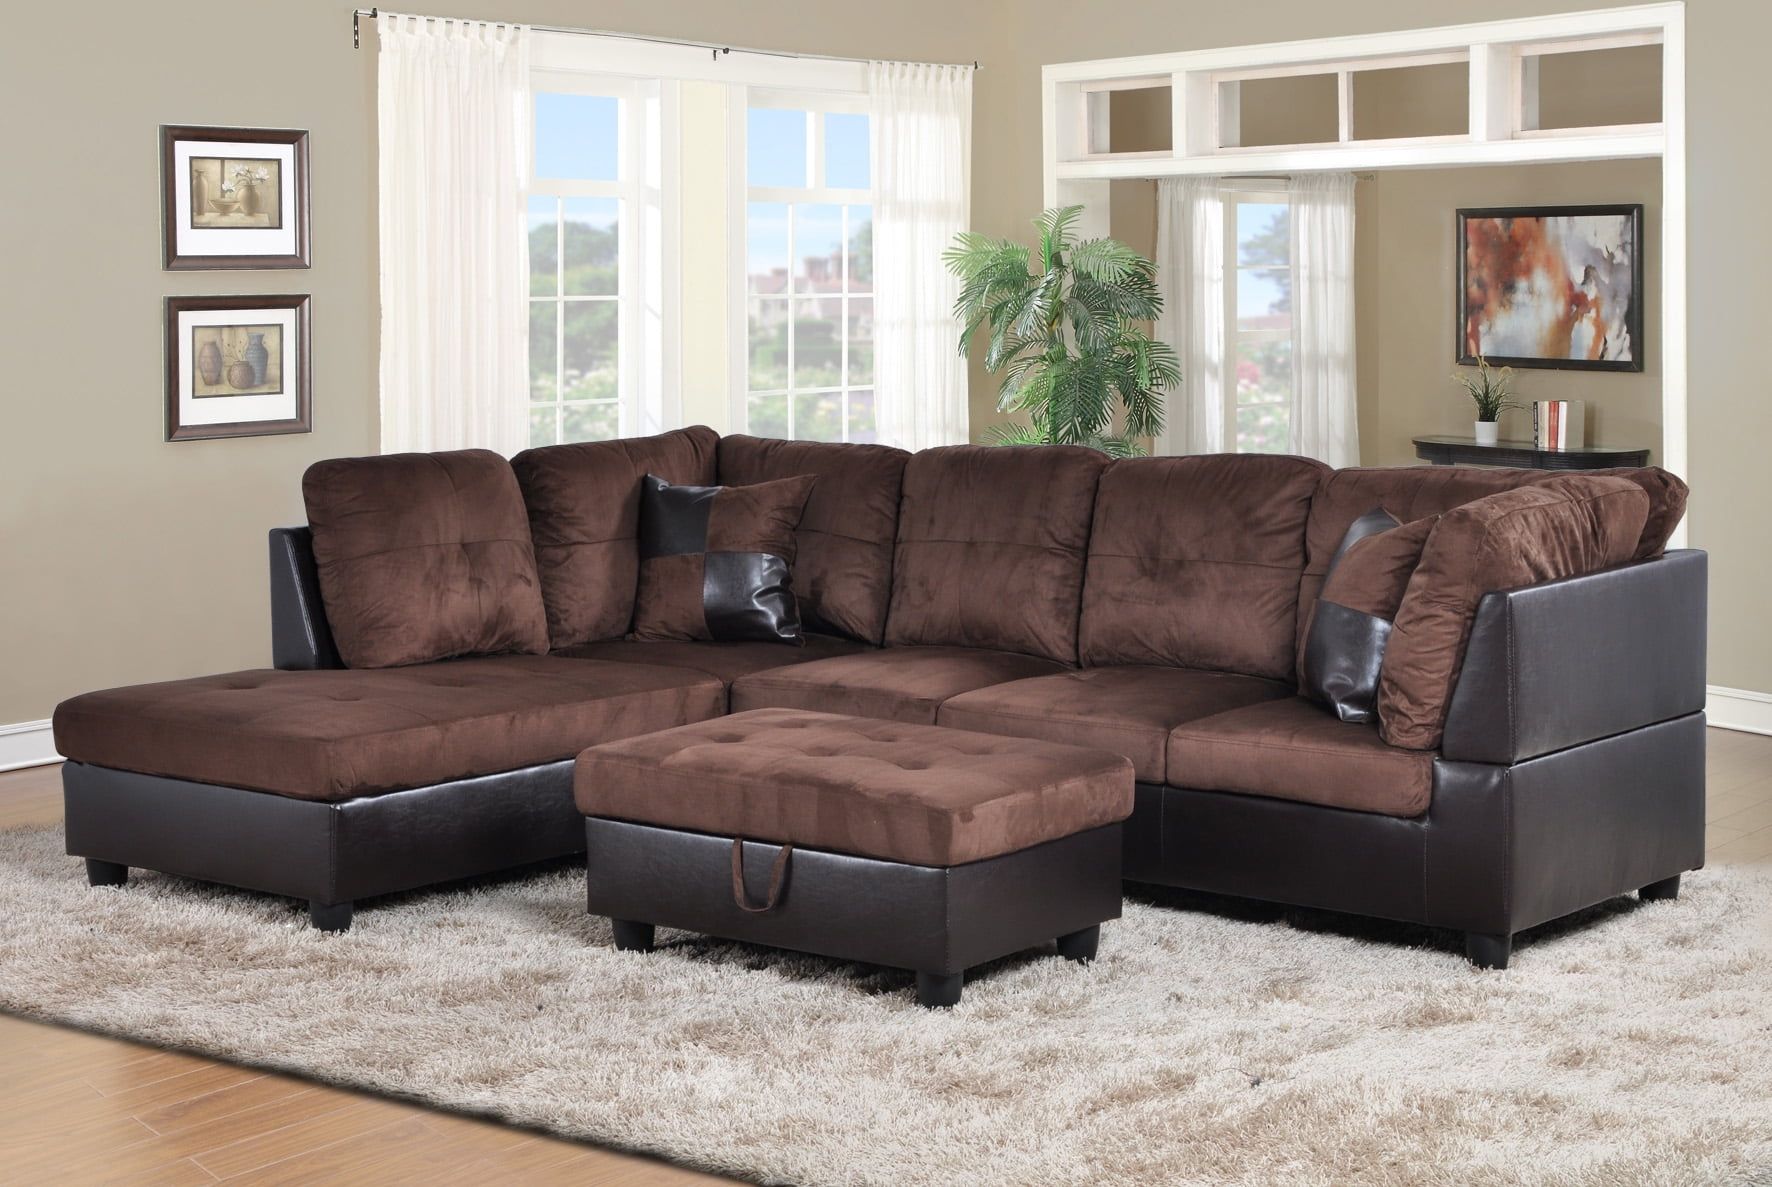 Ponliving Furniture Hermann Left Chaise Sectional Sofa With Storage Throughout Sofas With Ottomans In Brown (View 3 of 20)